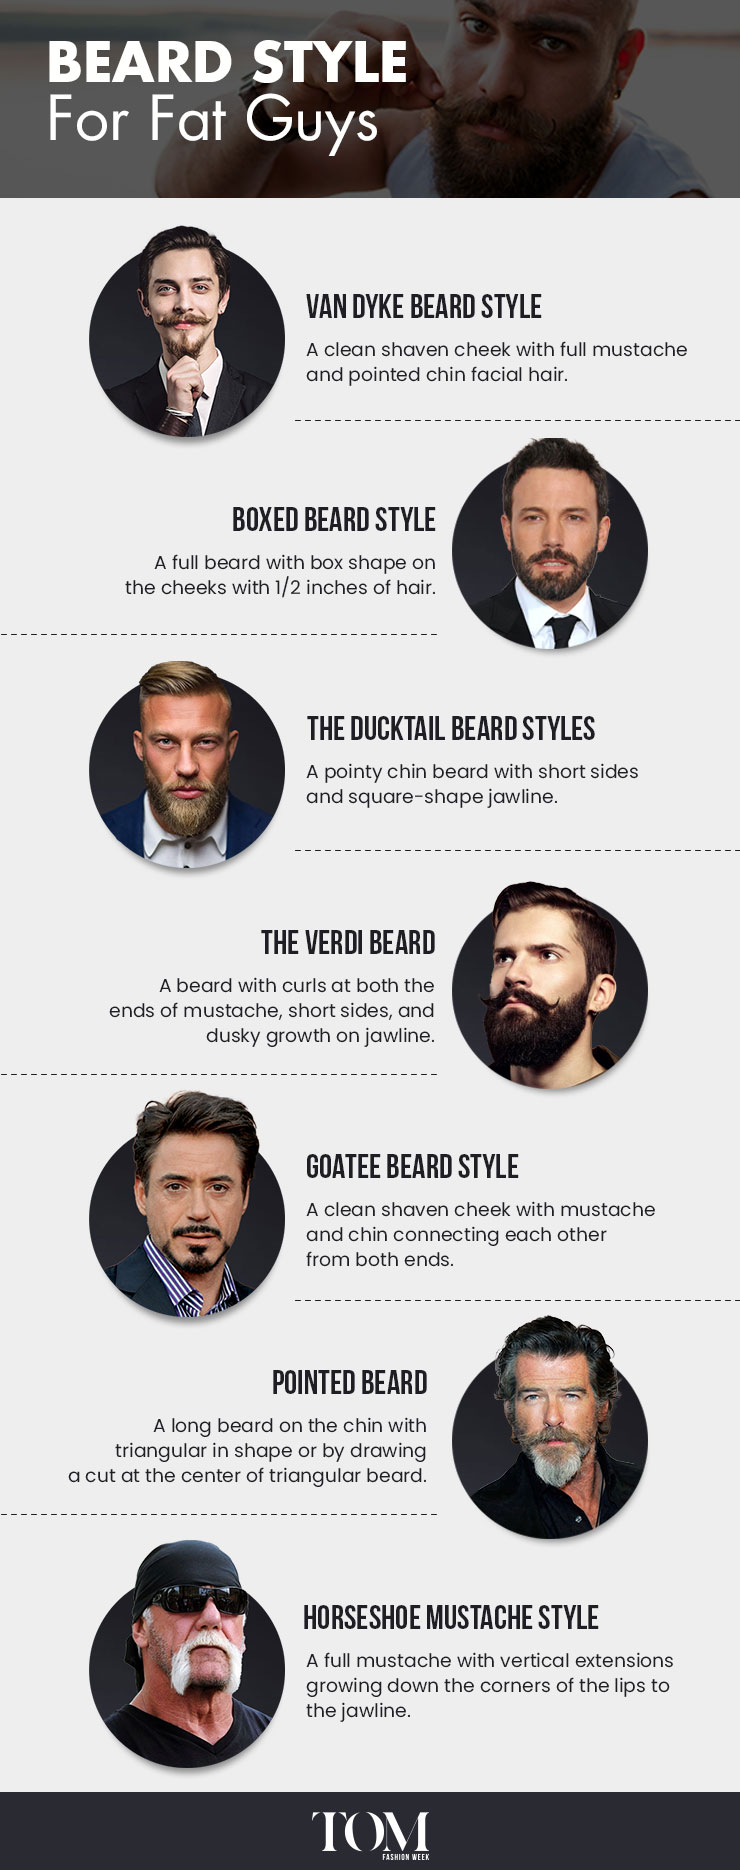 Click To Find The Best Look With Beard Styles for Fat Guys